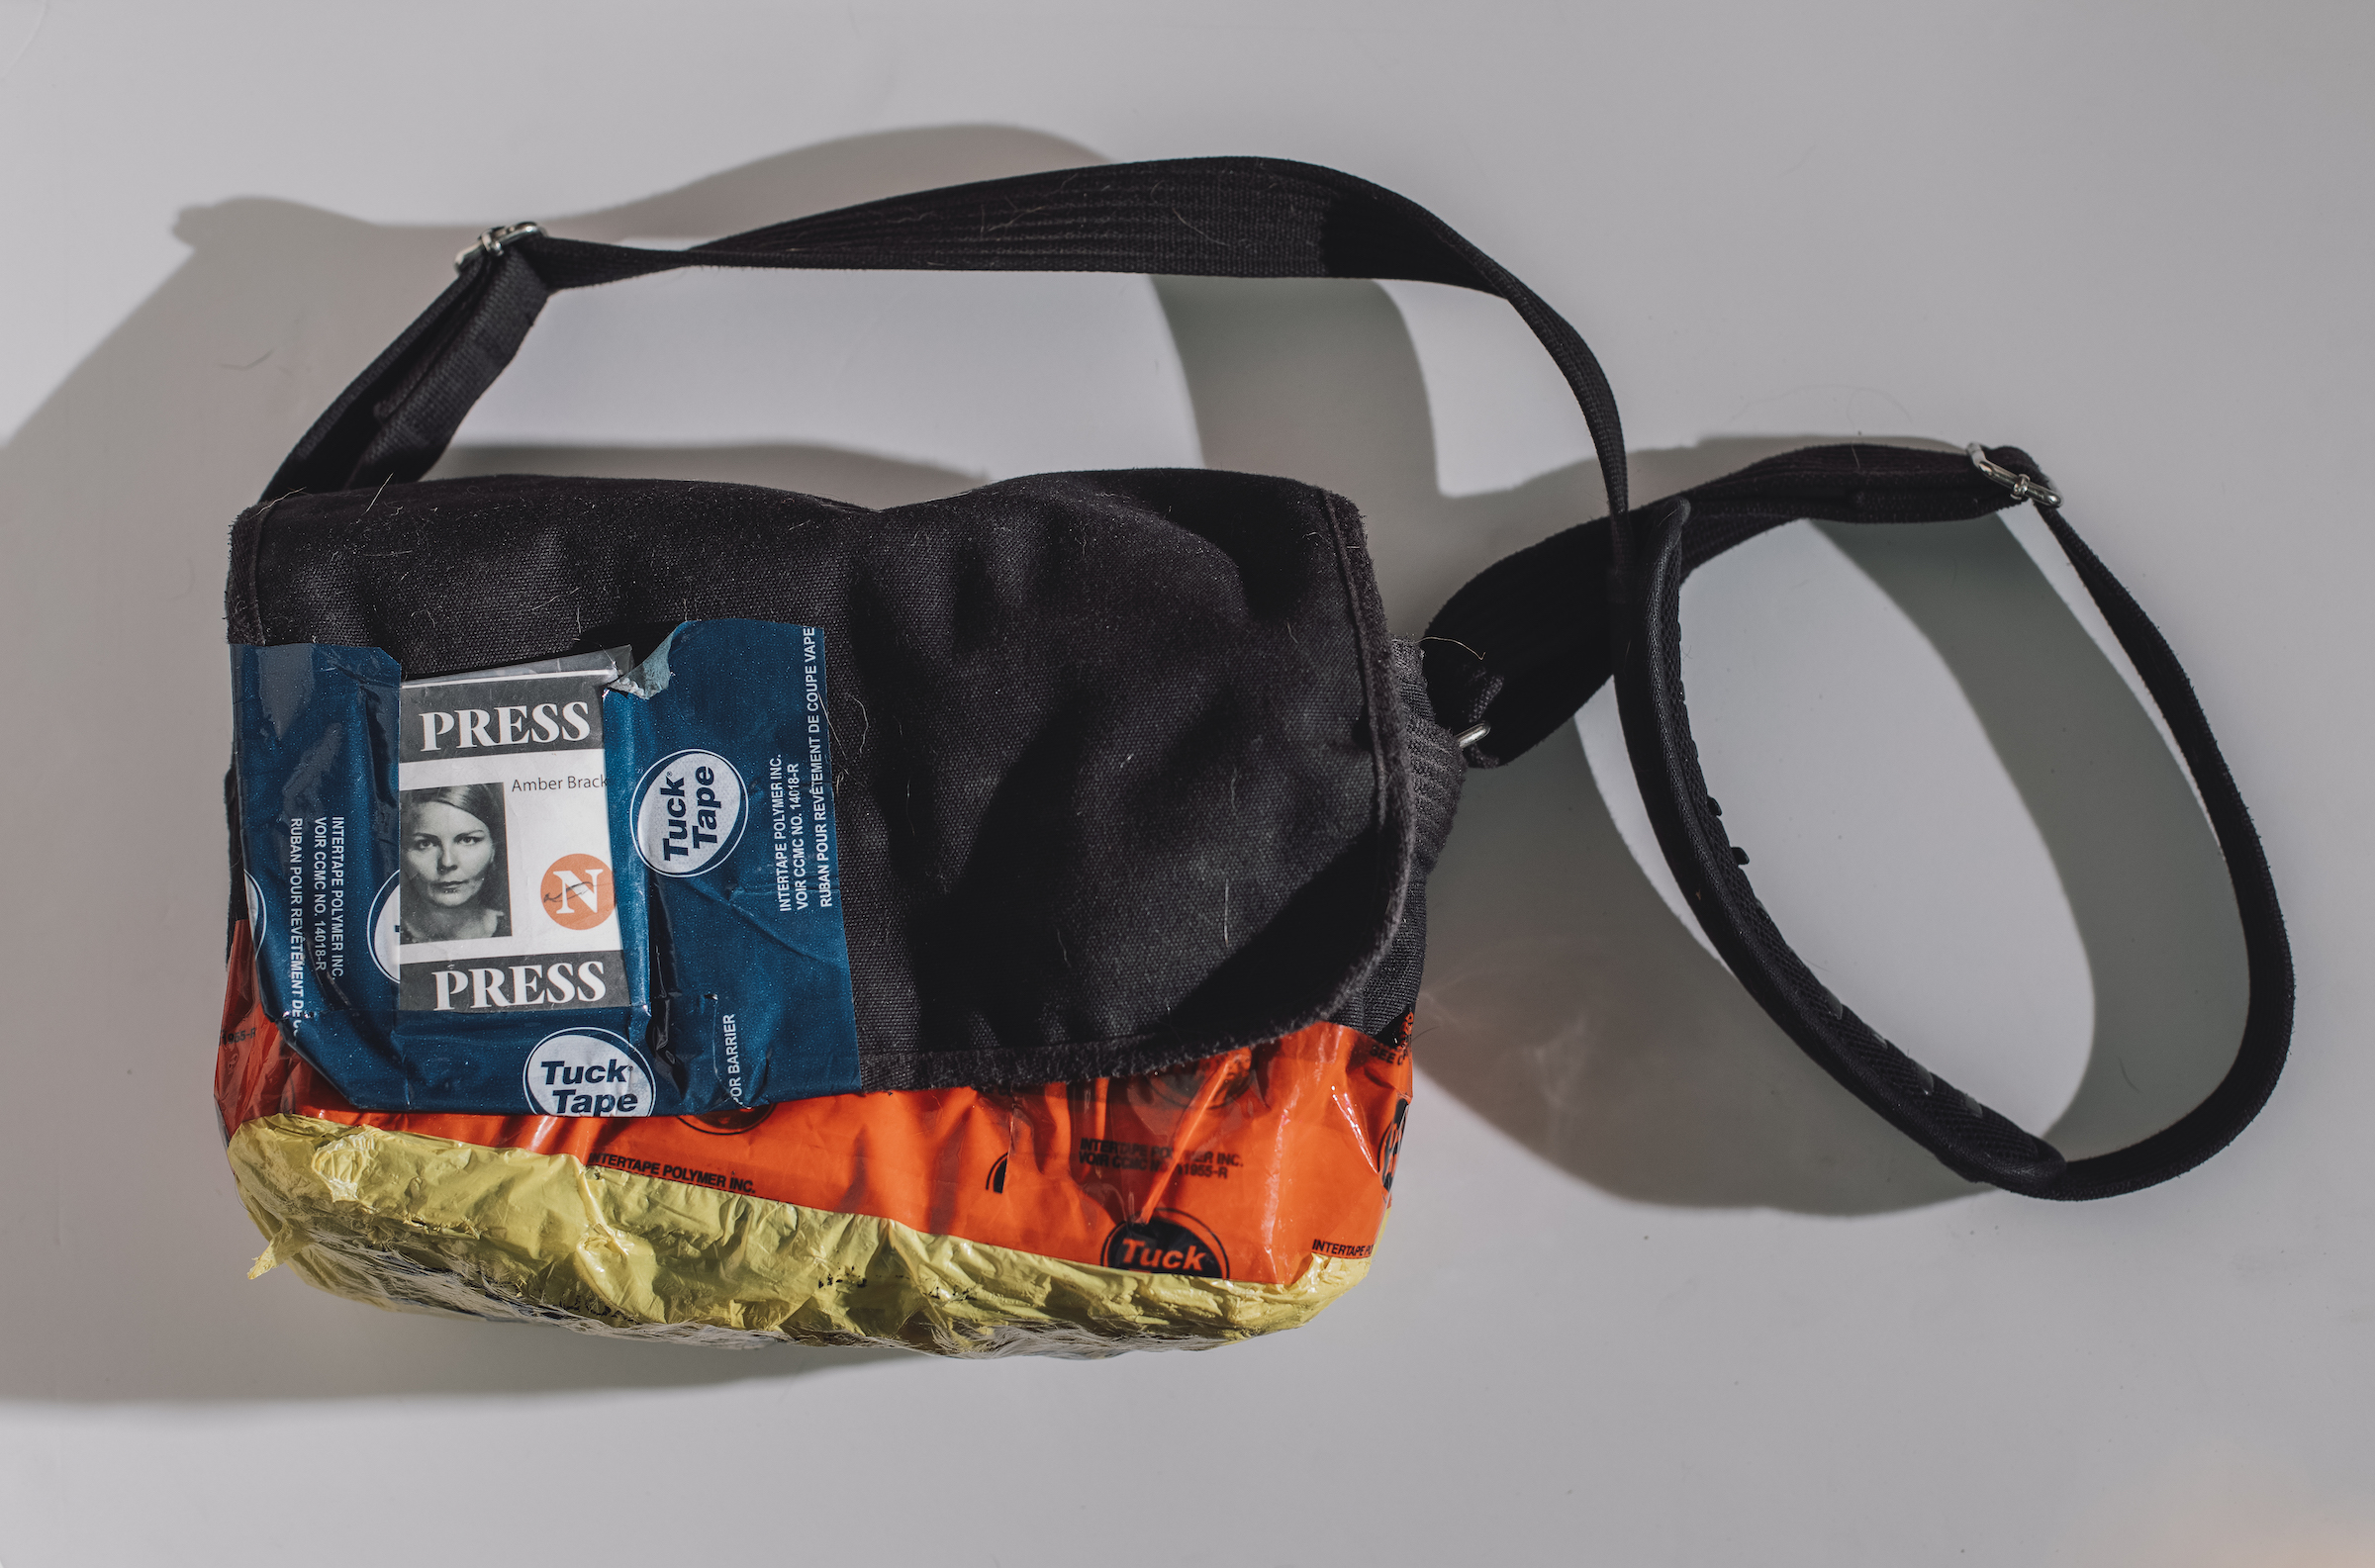 The camera bag used by photojournalist Amber Bracken when she was arrested while documenting the RCMP raid on Wet'suwet'en territory. A press credential label is seen taped on.